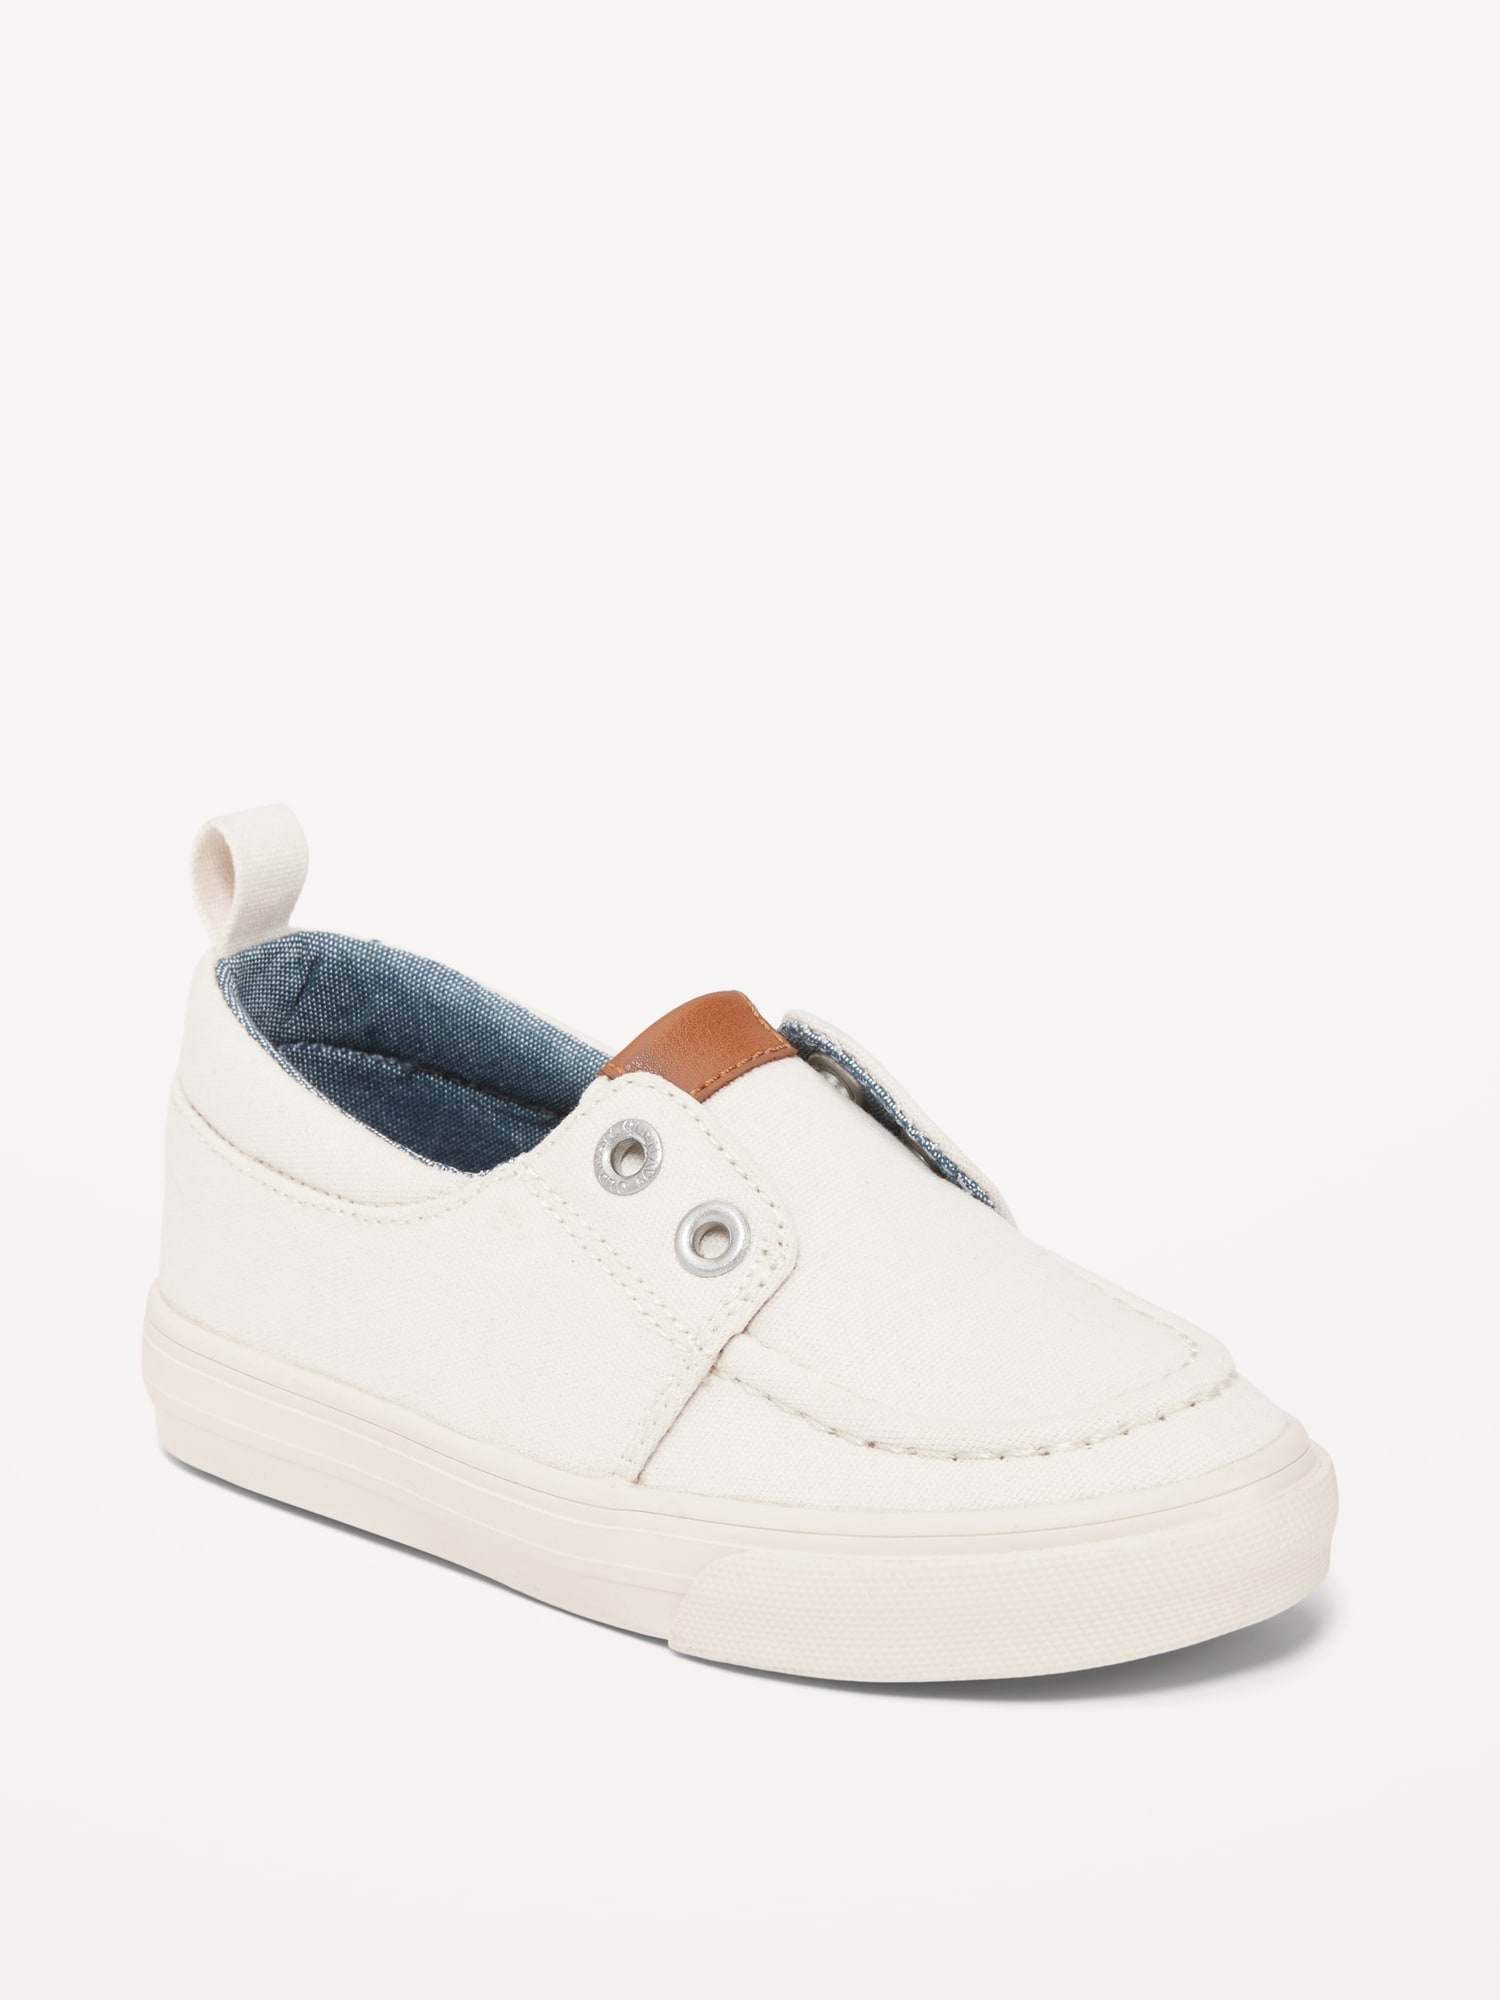 Old Navy Canvas Boat-Style Sneakers for Toddler Boys white. 1